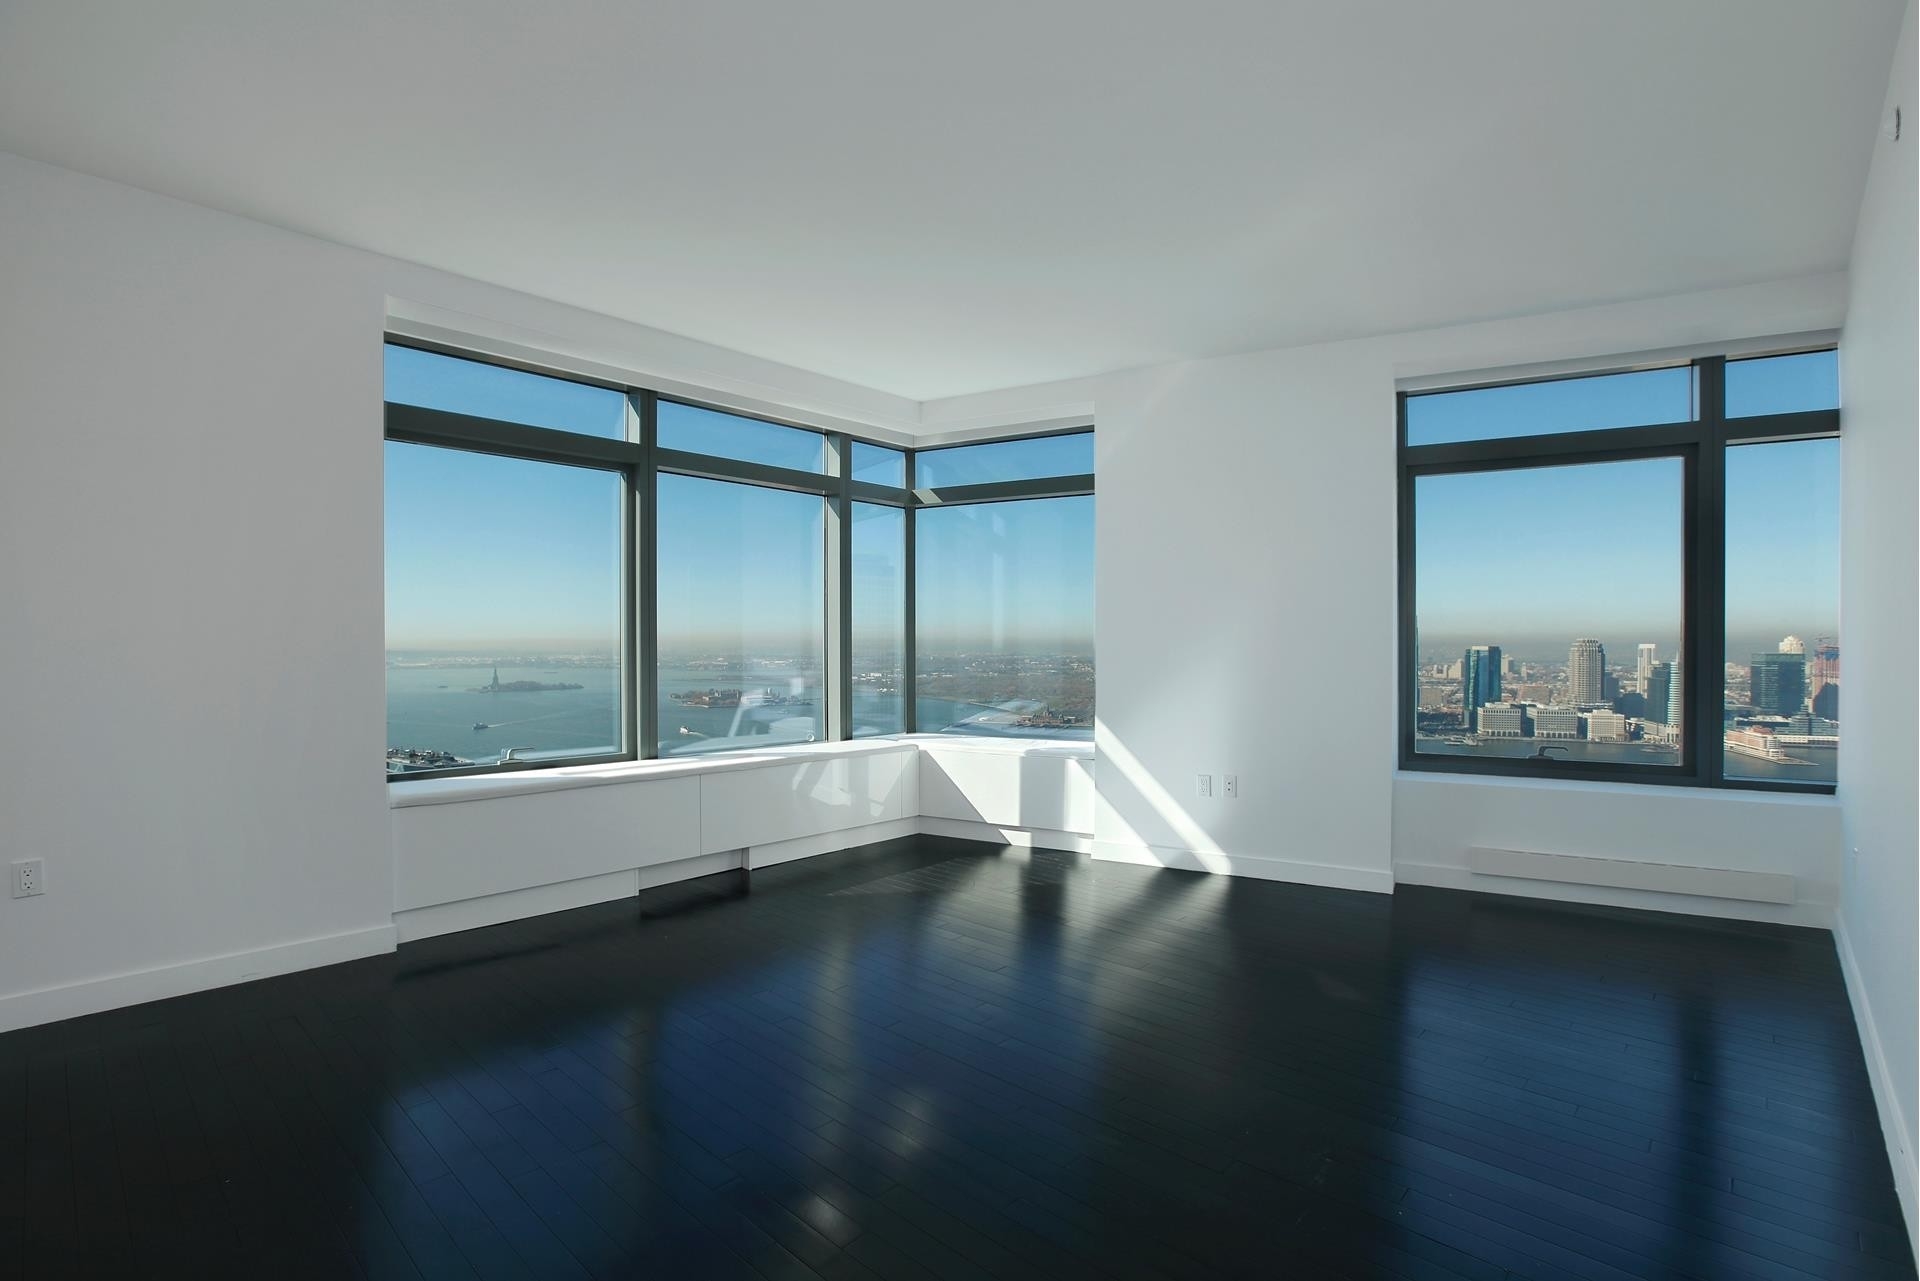 Condominium for Sale at W Downtown Res., 123 WASHINGTON ST, 44A Financial District, New York, NY 10006